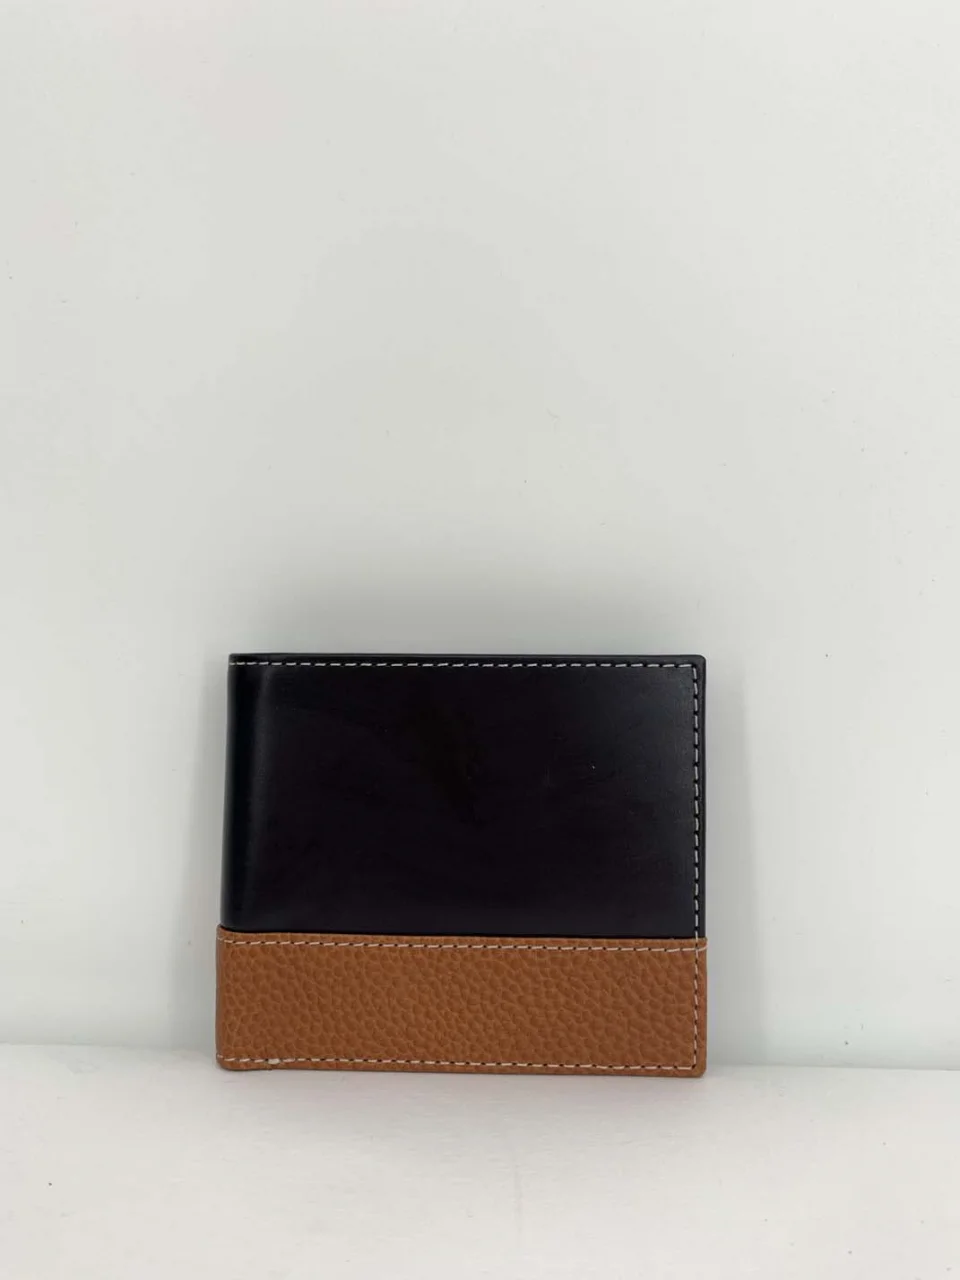 Enzo men's wallet in EquoSolidale recycled leather